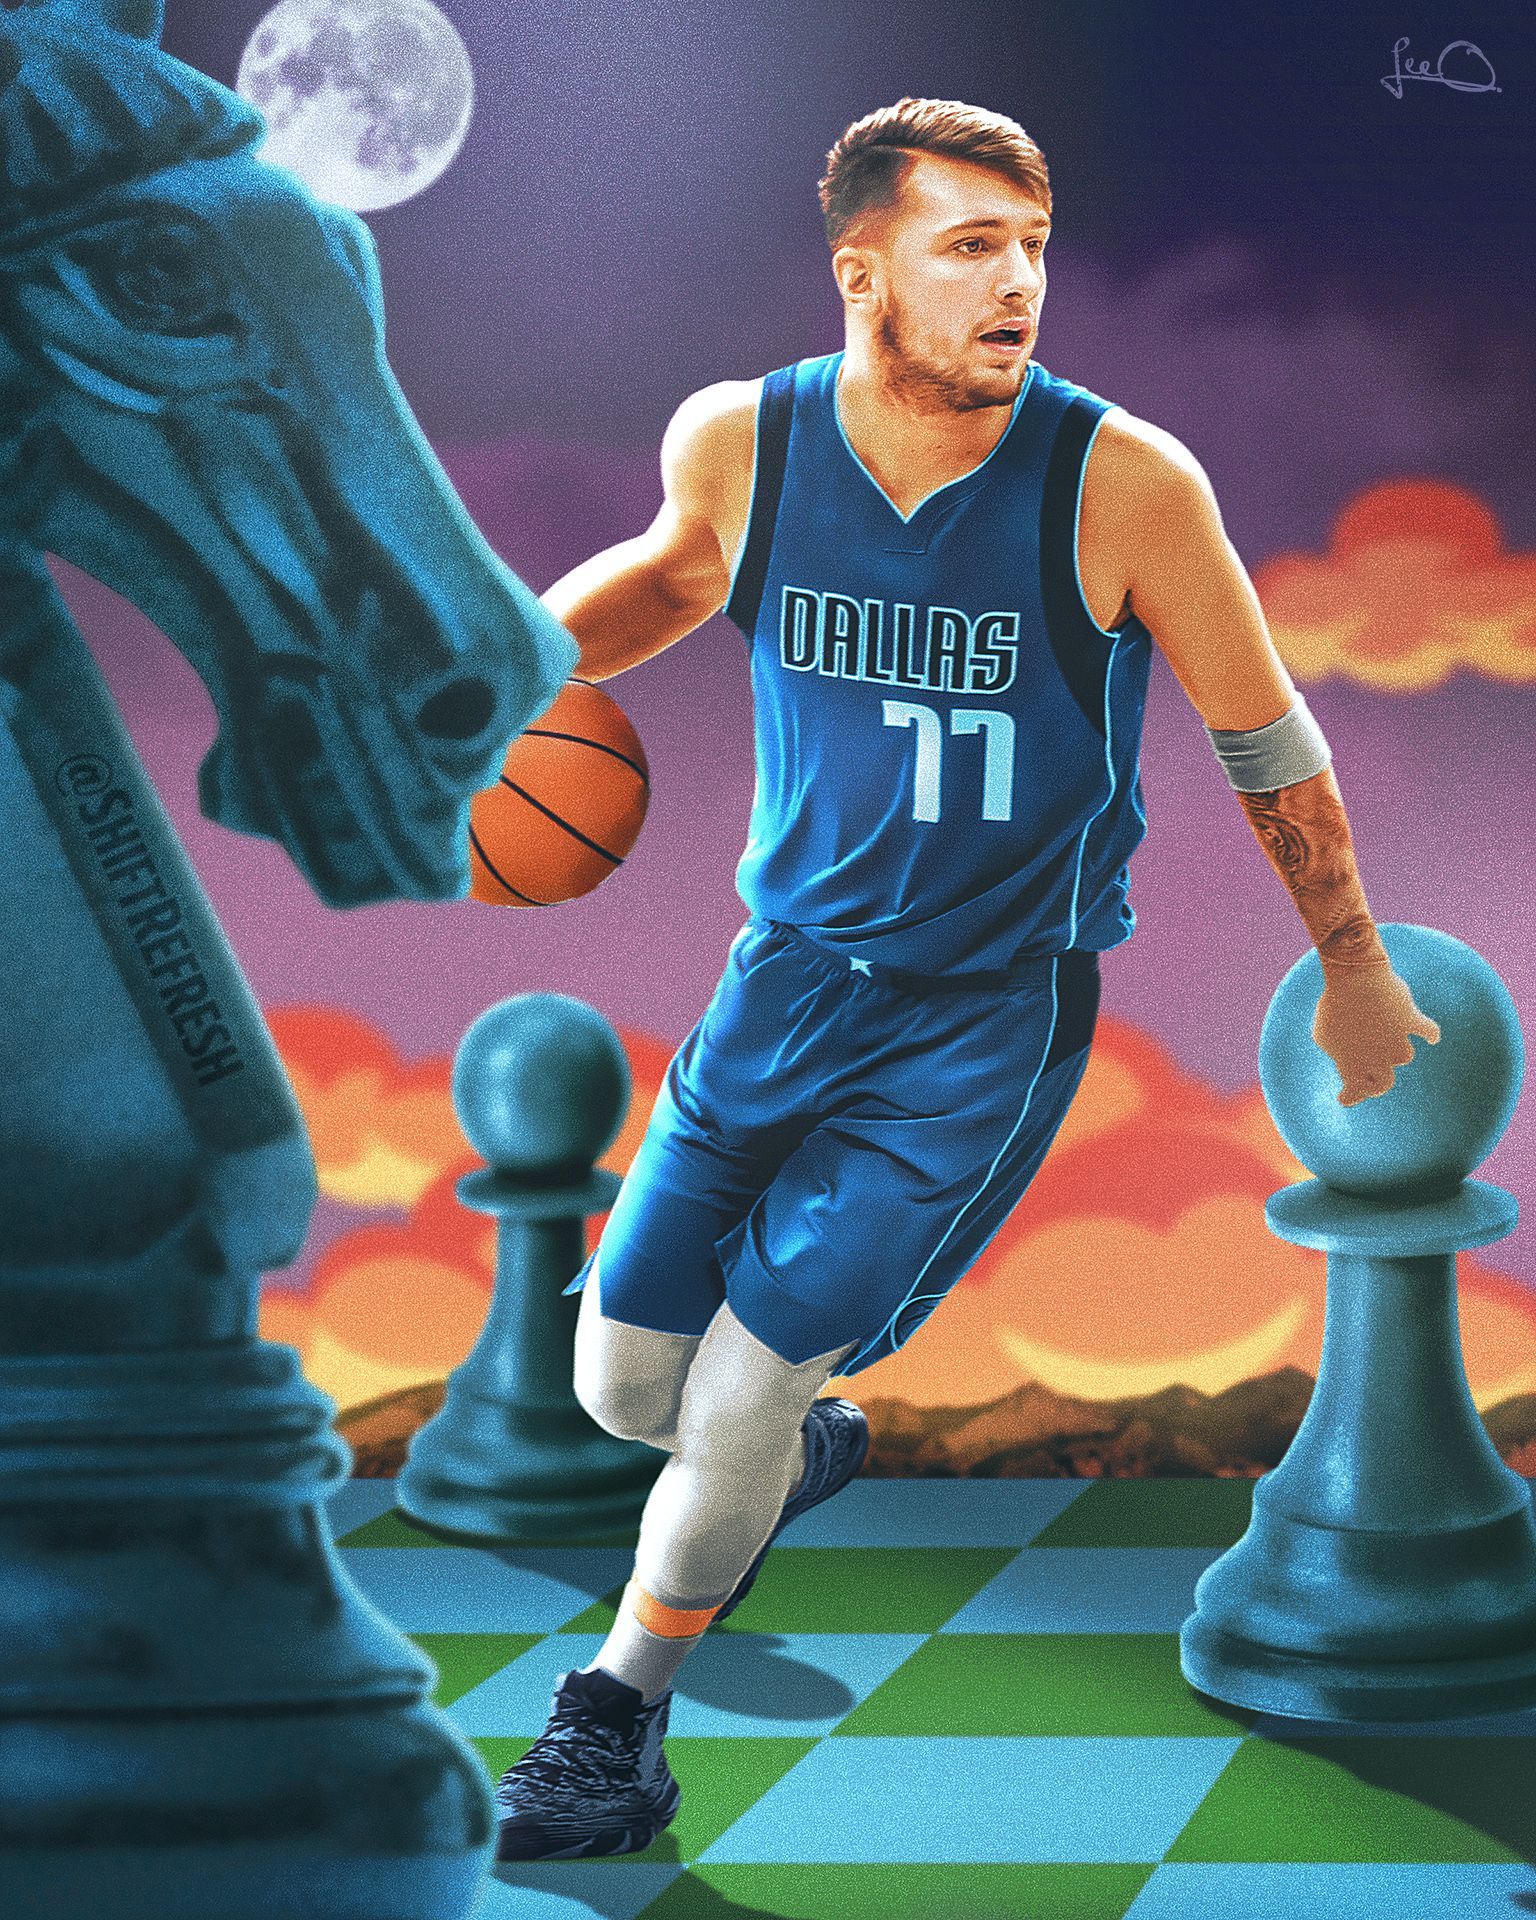 Luka Doncic Wallpapers - Top Free Luka Doncic Backgrounds - WallpaperAccess